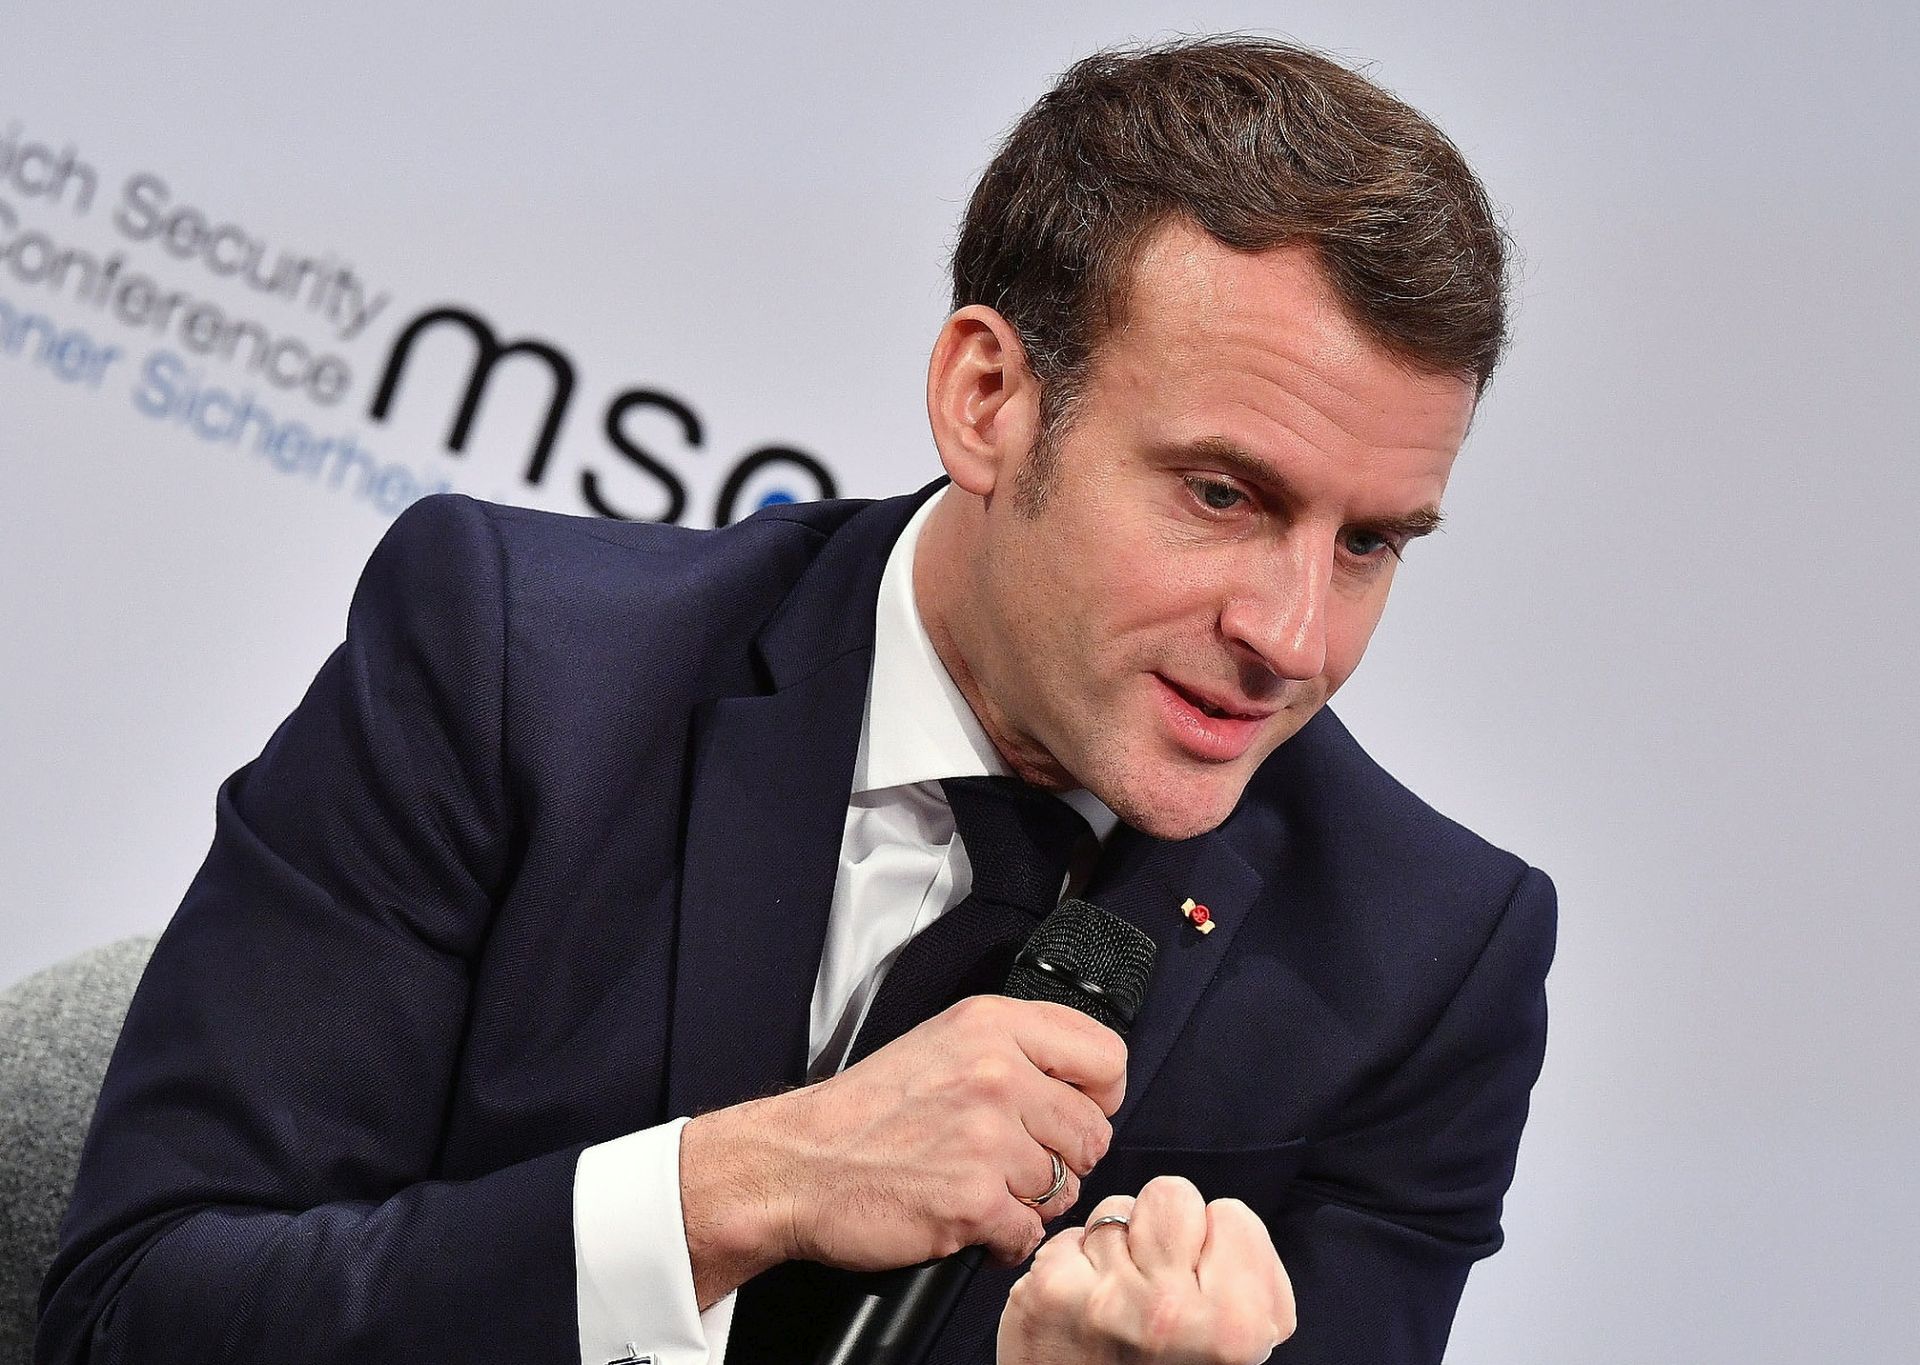 epa08219112 French President Emmanuel Macron gestures as he speaks during the Chairman's Interview session at the 56th Munich Security Conference (MSC) in Munich, Germany, 15 February 2020. More than 500 high-level international decision-makers meet at the 56th Munich Security Conference in Munich during their annual meeting from 14 to 16 February 2020 to discuss global security issues.  EPA/PHILIPP GUELLAND